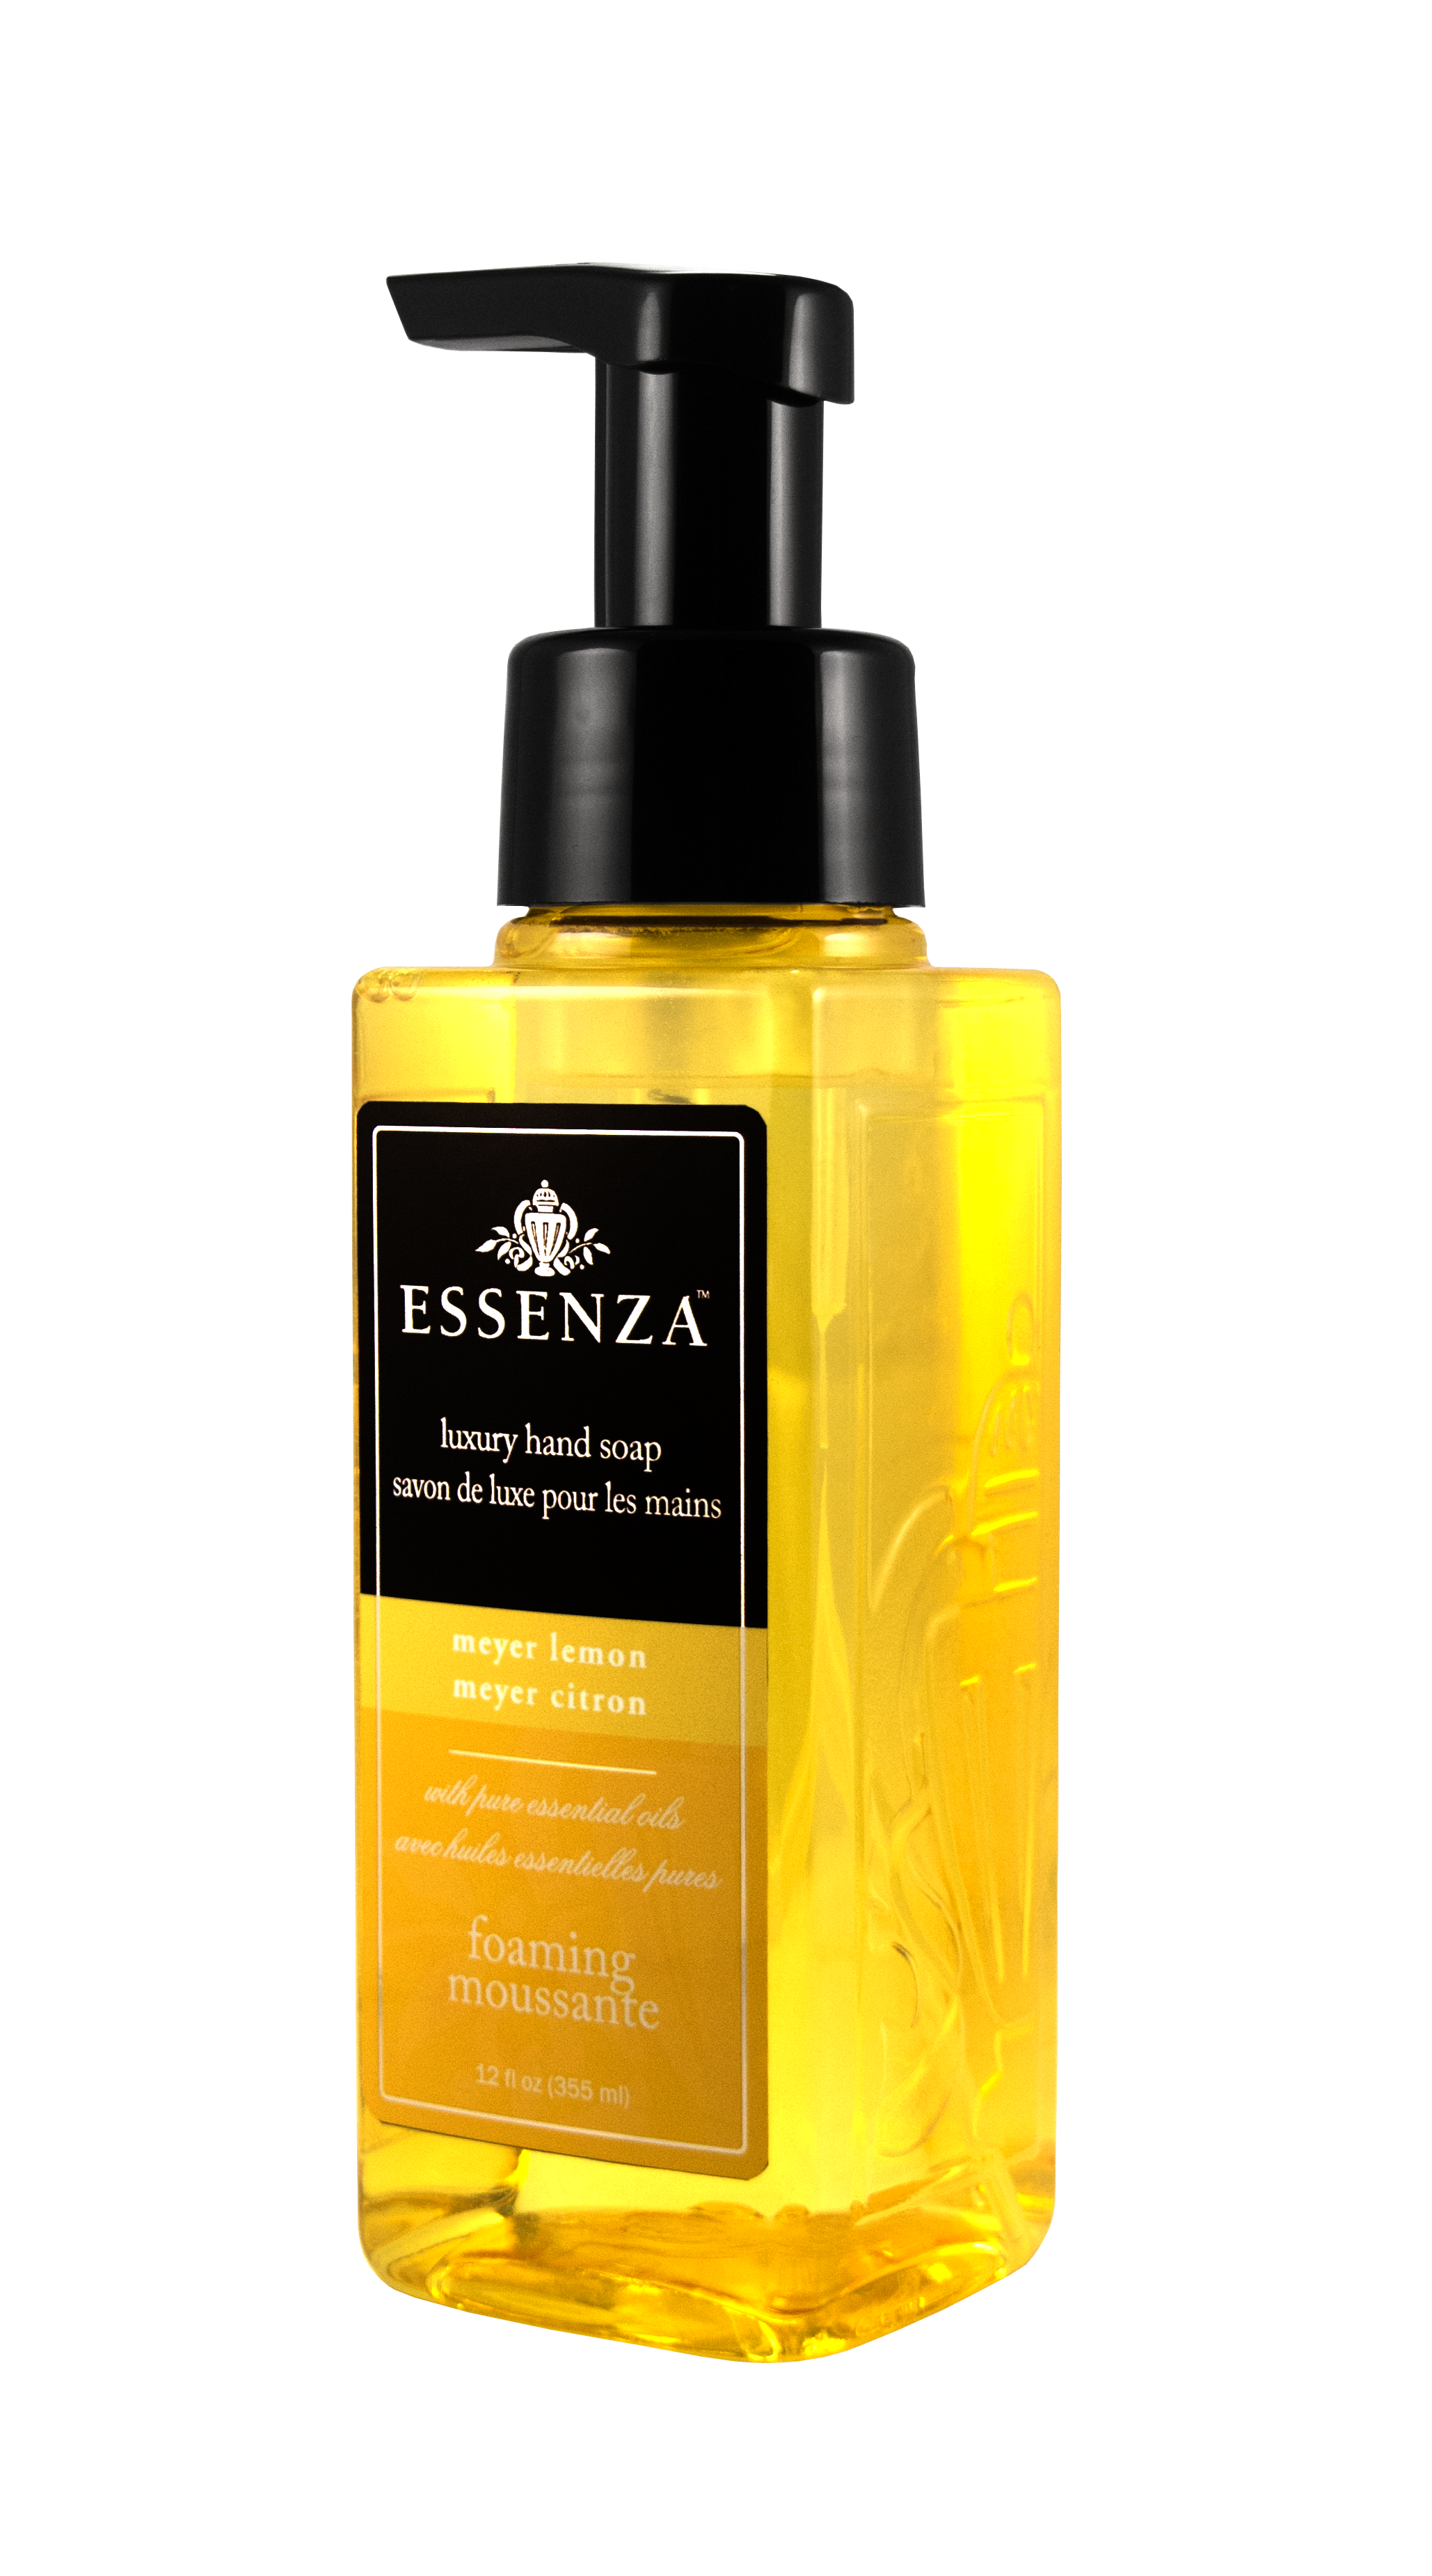 Experience Meyer Lemon Hand Soap by Essenza (Olympic Mountain Products)